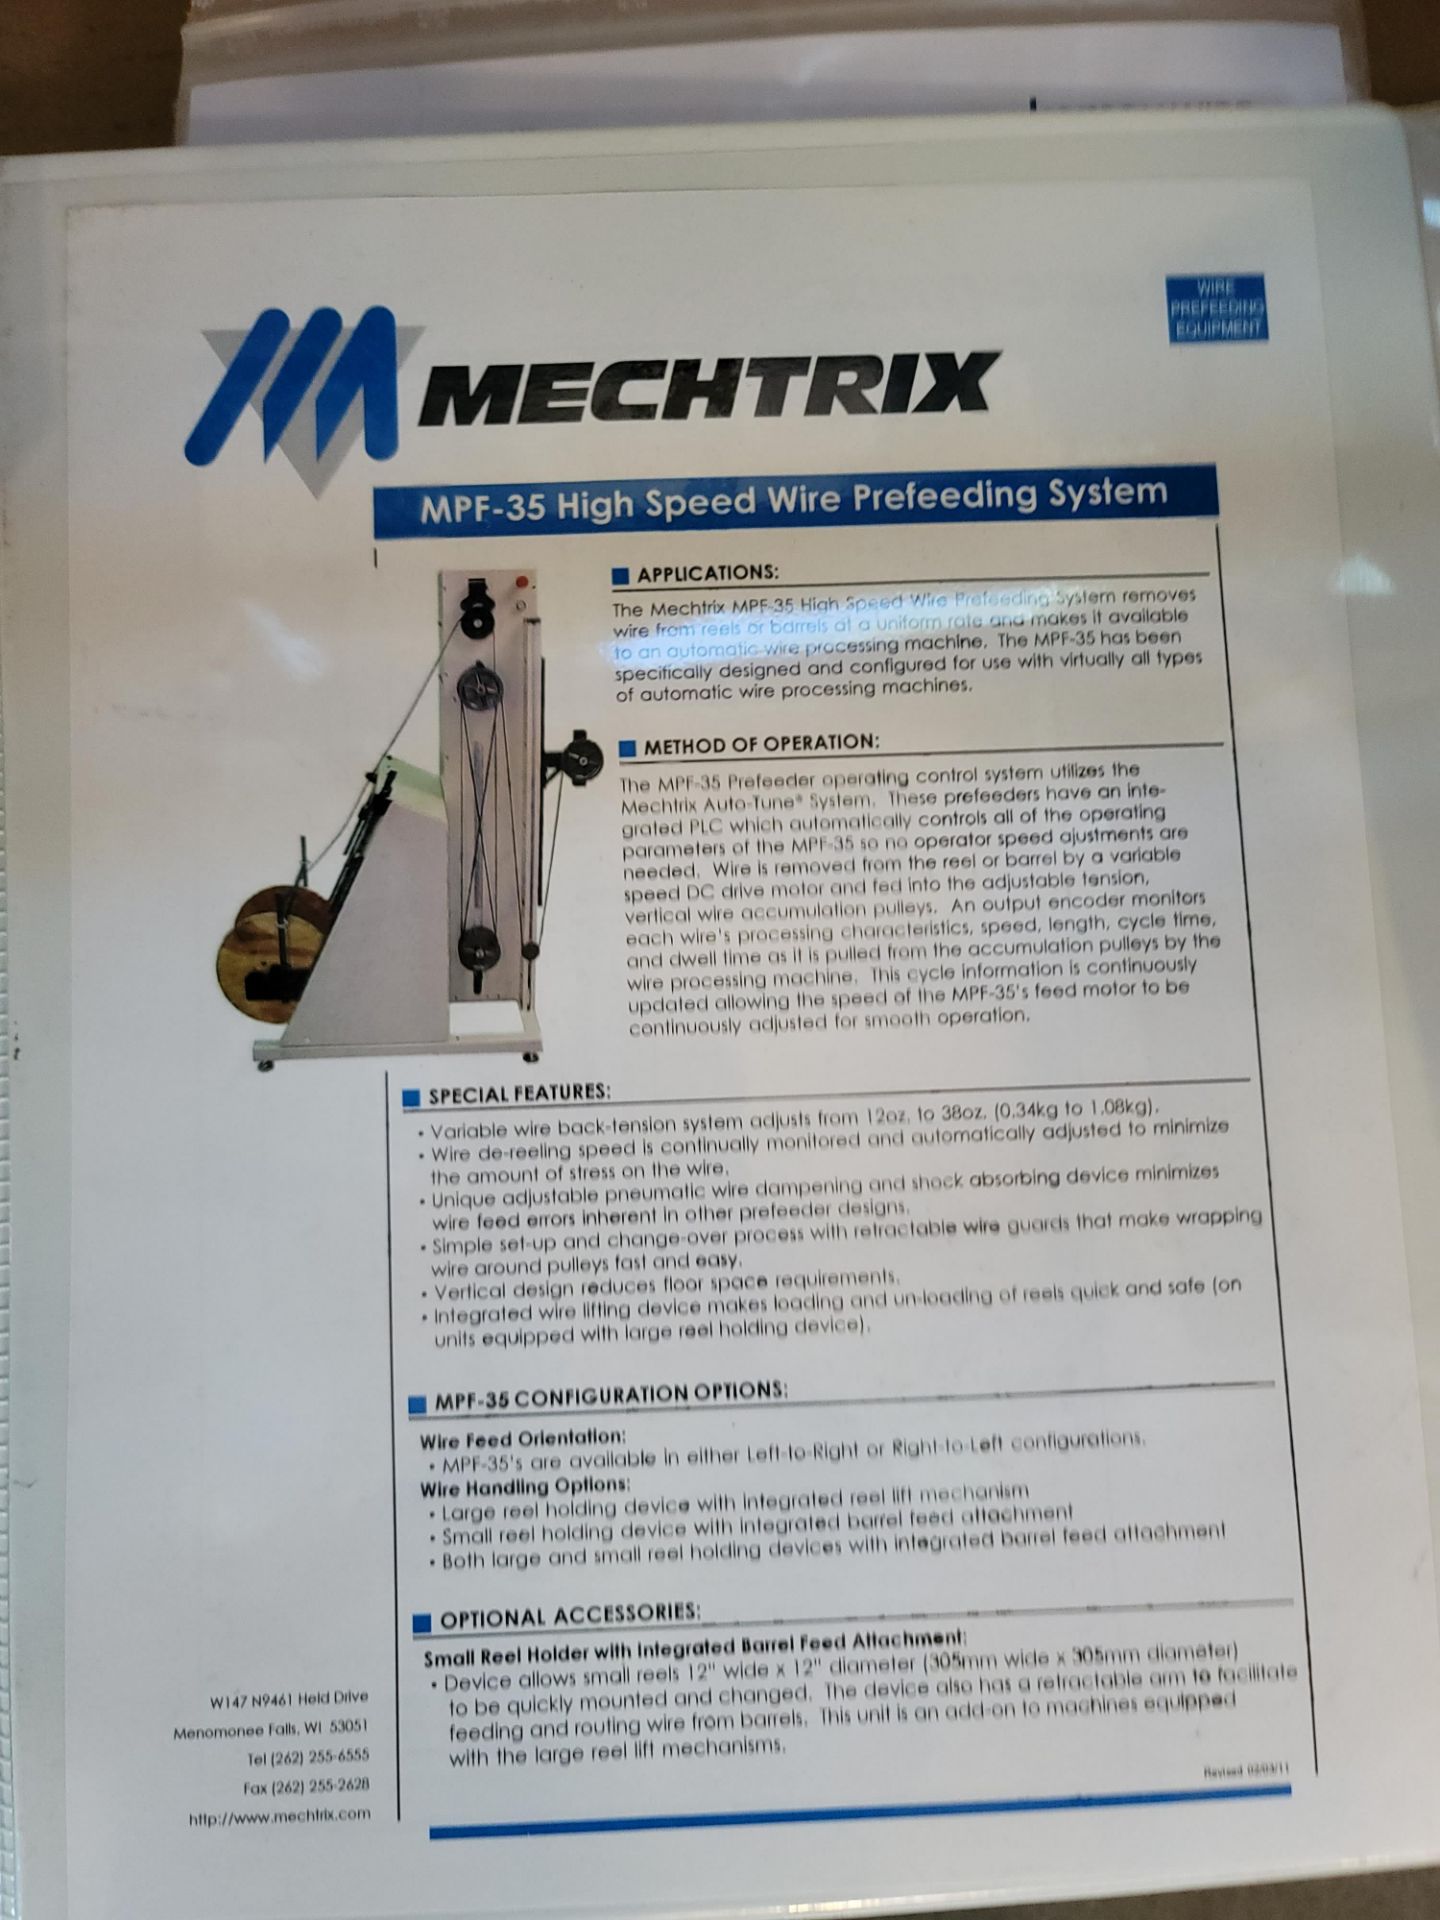 MECHTRIX MPF-35 HIGH SPEED WIRE PREFEEDING SYSTEM, MODEL 25700-501, S/N 17842 - Image 3 of 4